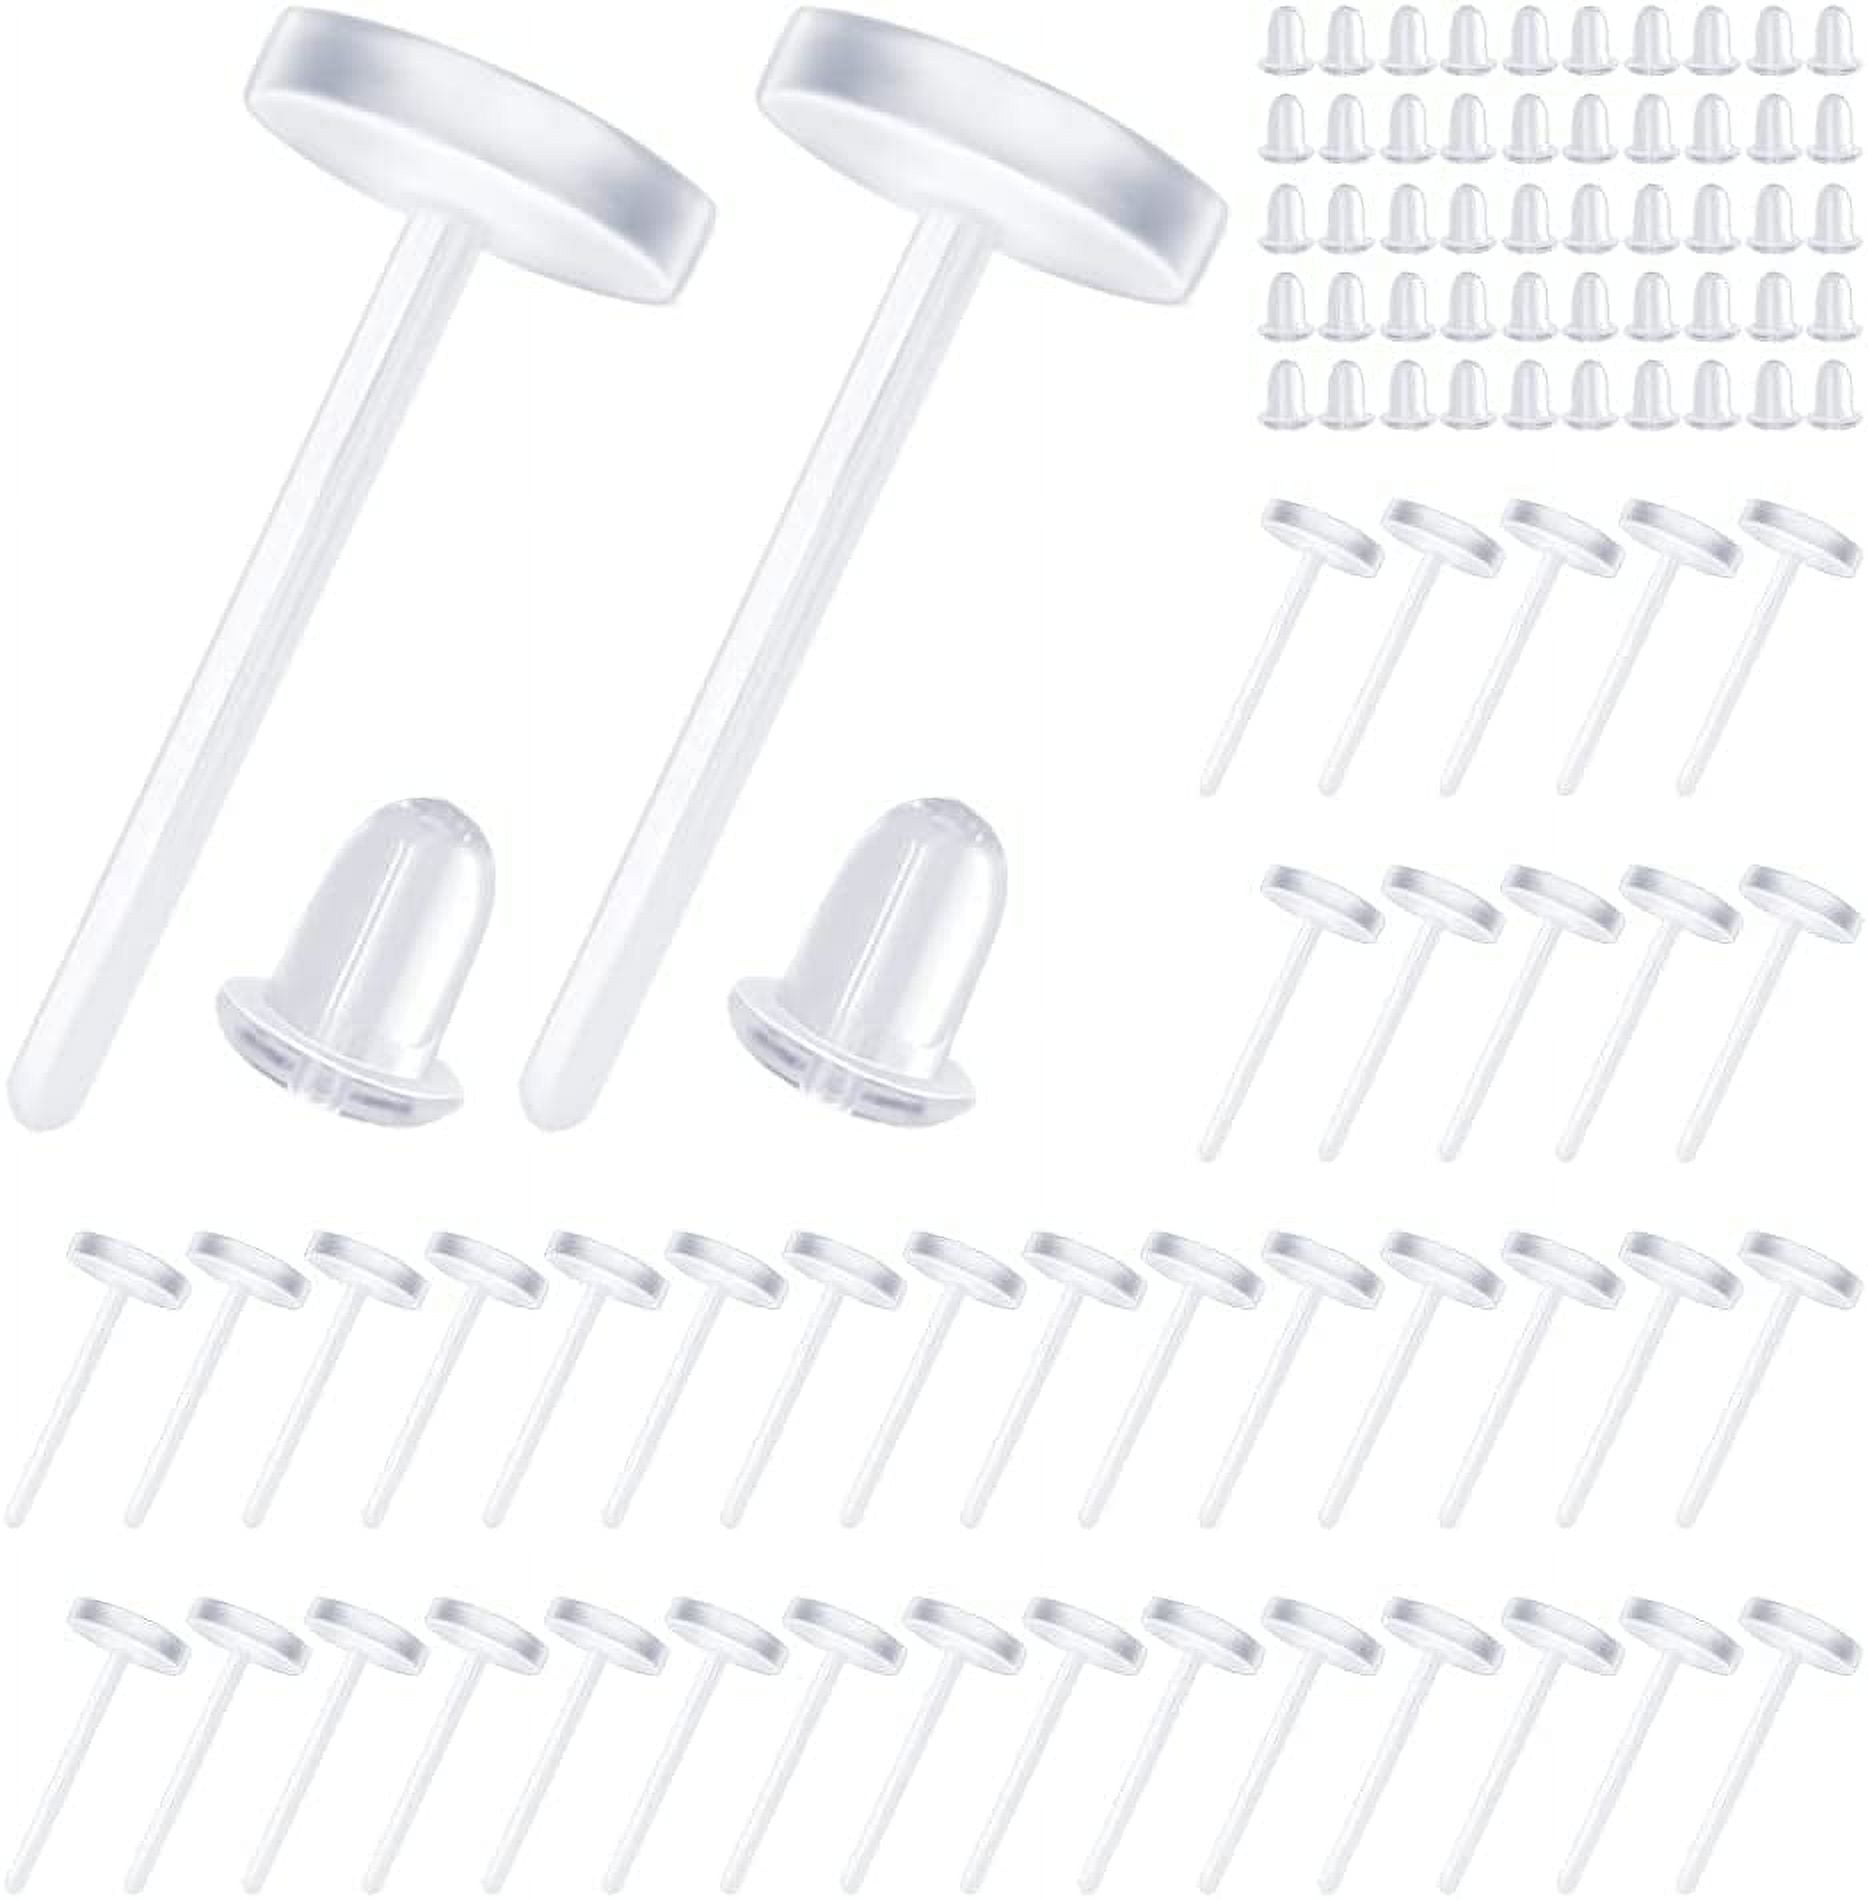 Clear Earring Studs, 3mm Plastic Invisible Earrings Blank Pins, Plastic  Earrings Posts Rubber Earrings for Surgery, Sport and Work (240 pieces/120  Pairs) 